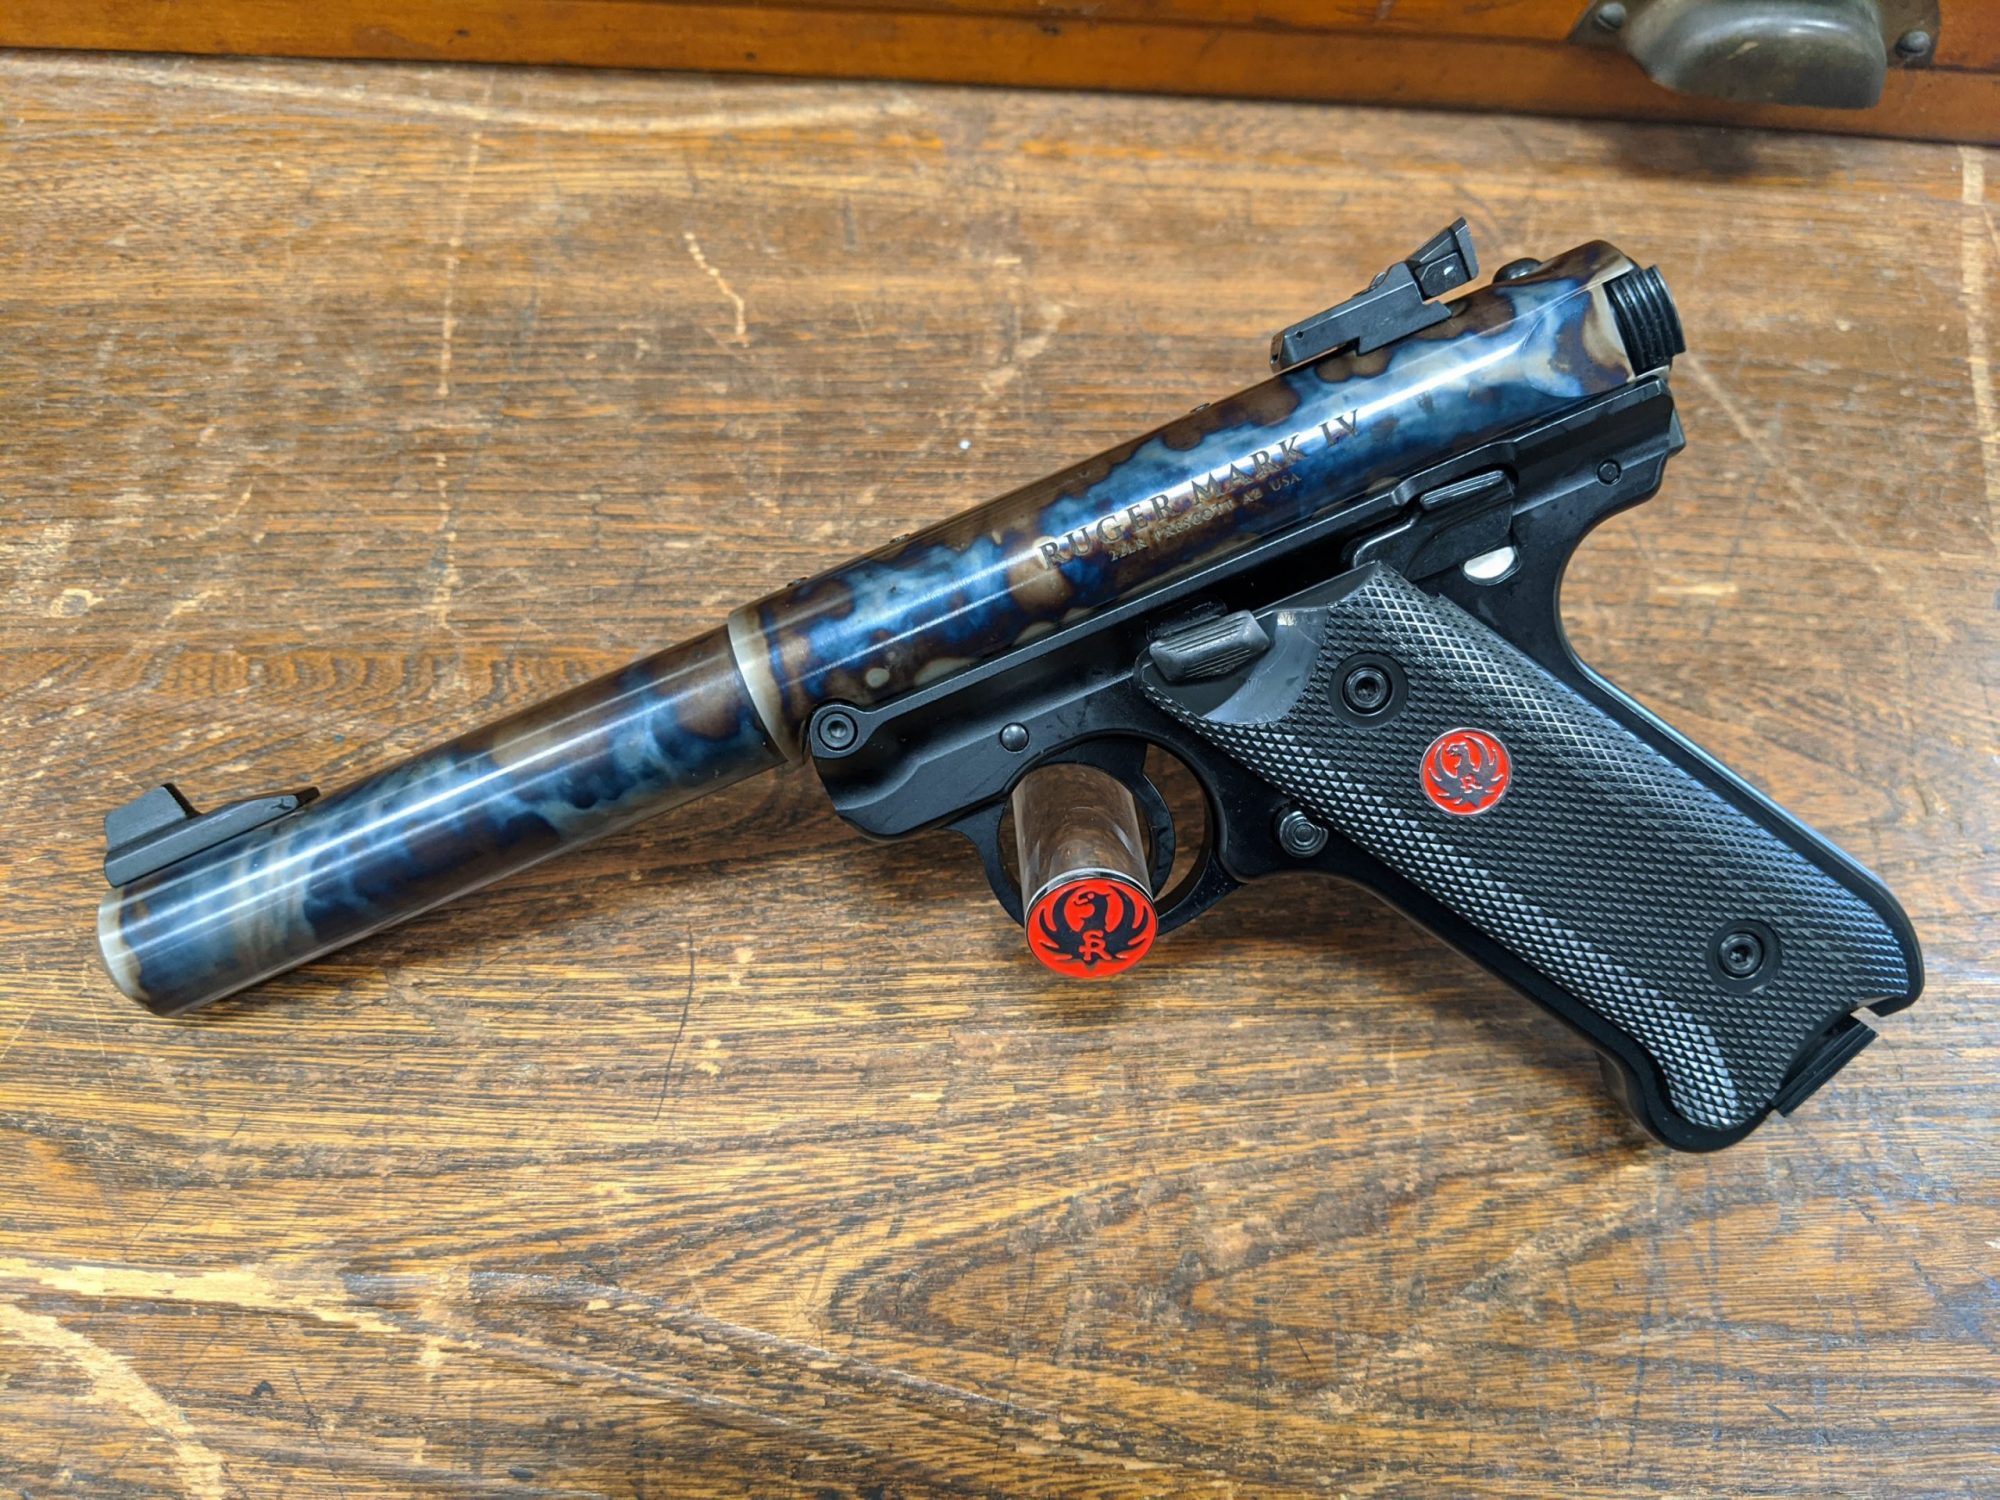 Photo of a Turnbull Finished Ruger Mark IV Target model, featuring traditional bone charcoal color case hardening by Turnbull Restoration of Bloomfield, NY